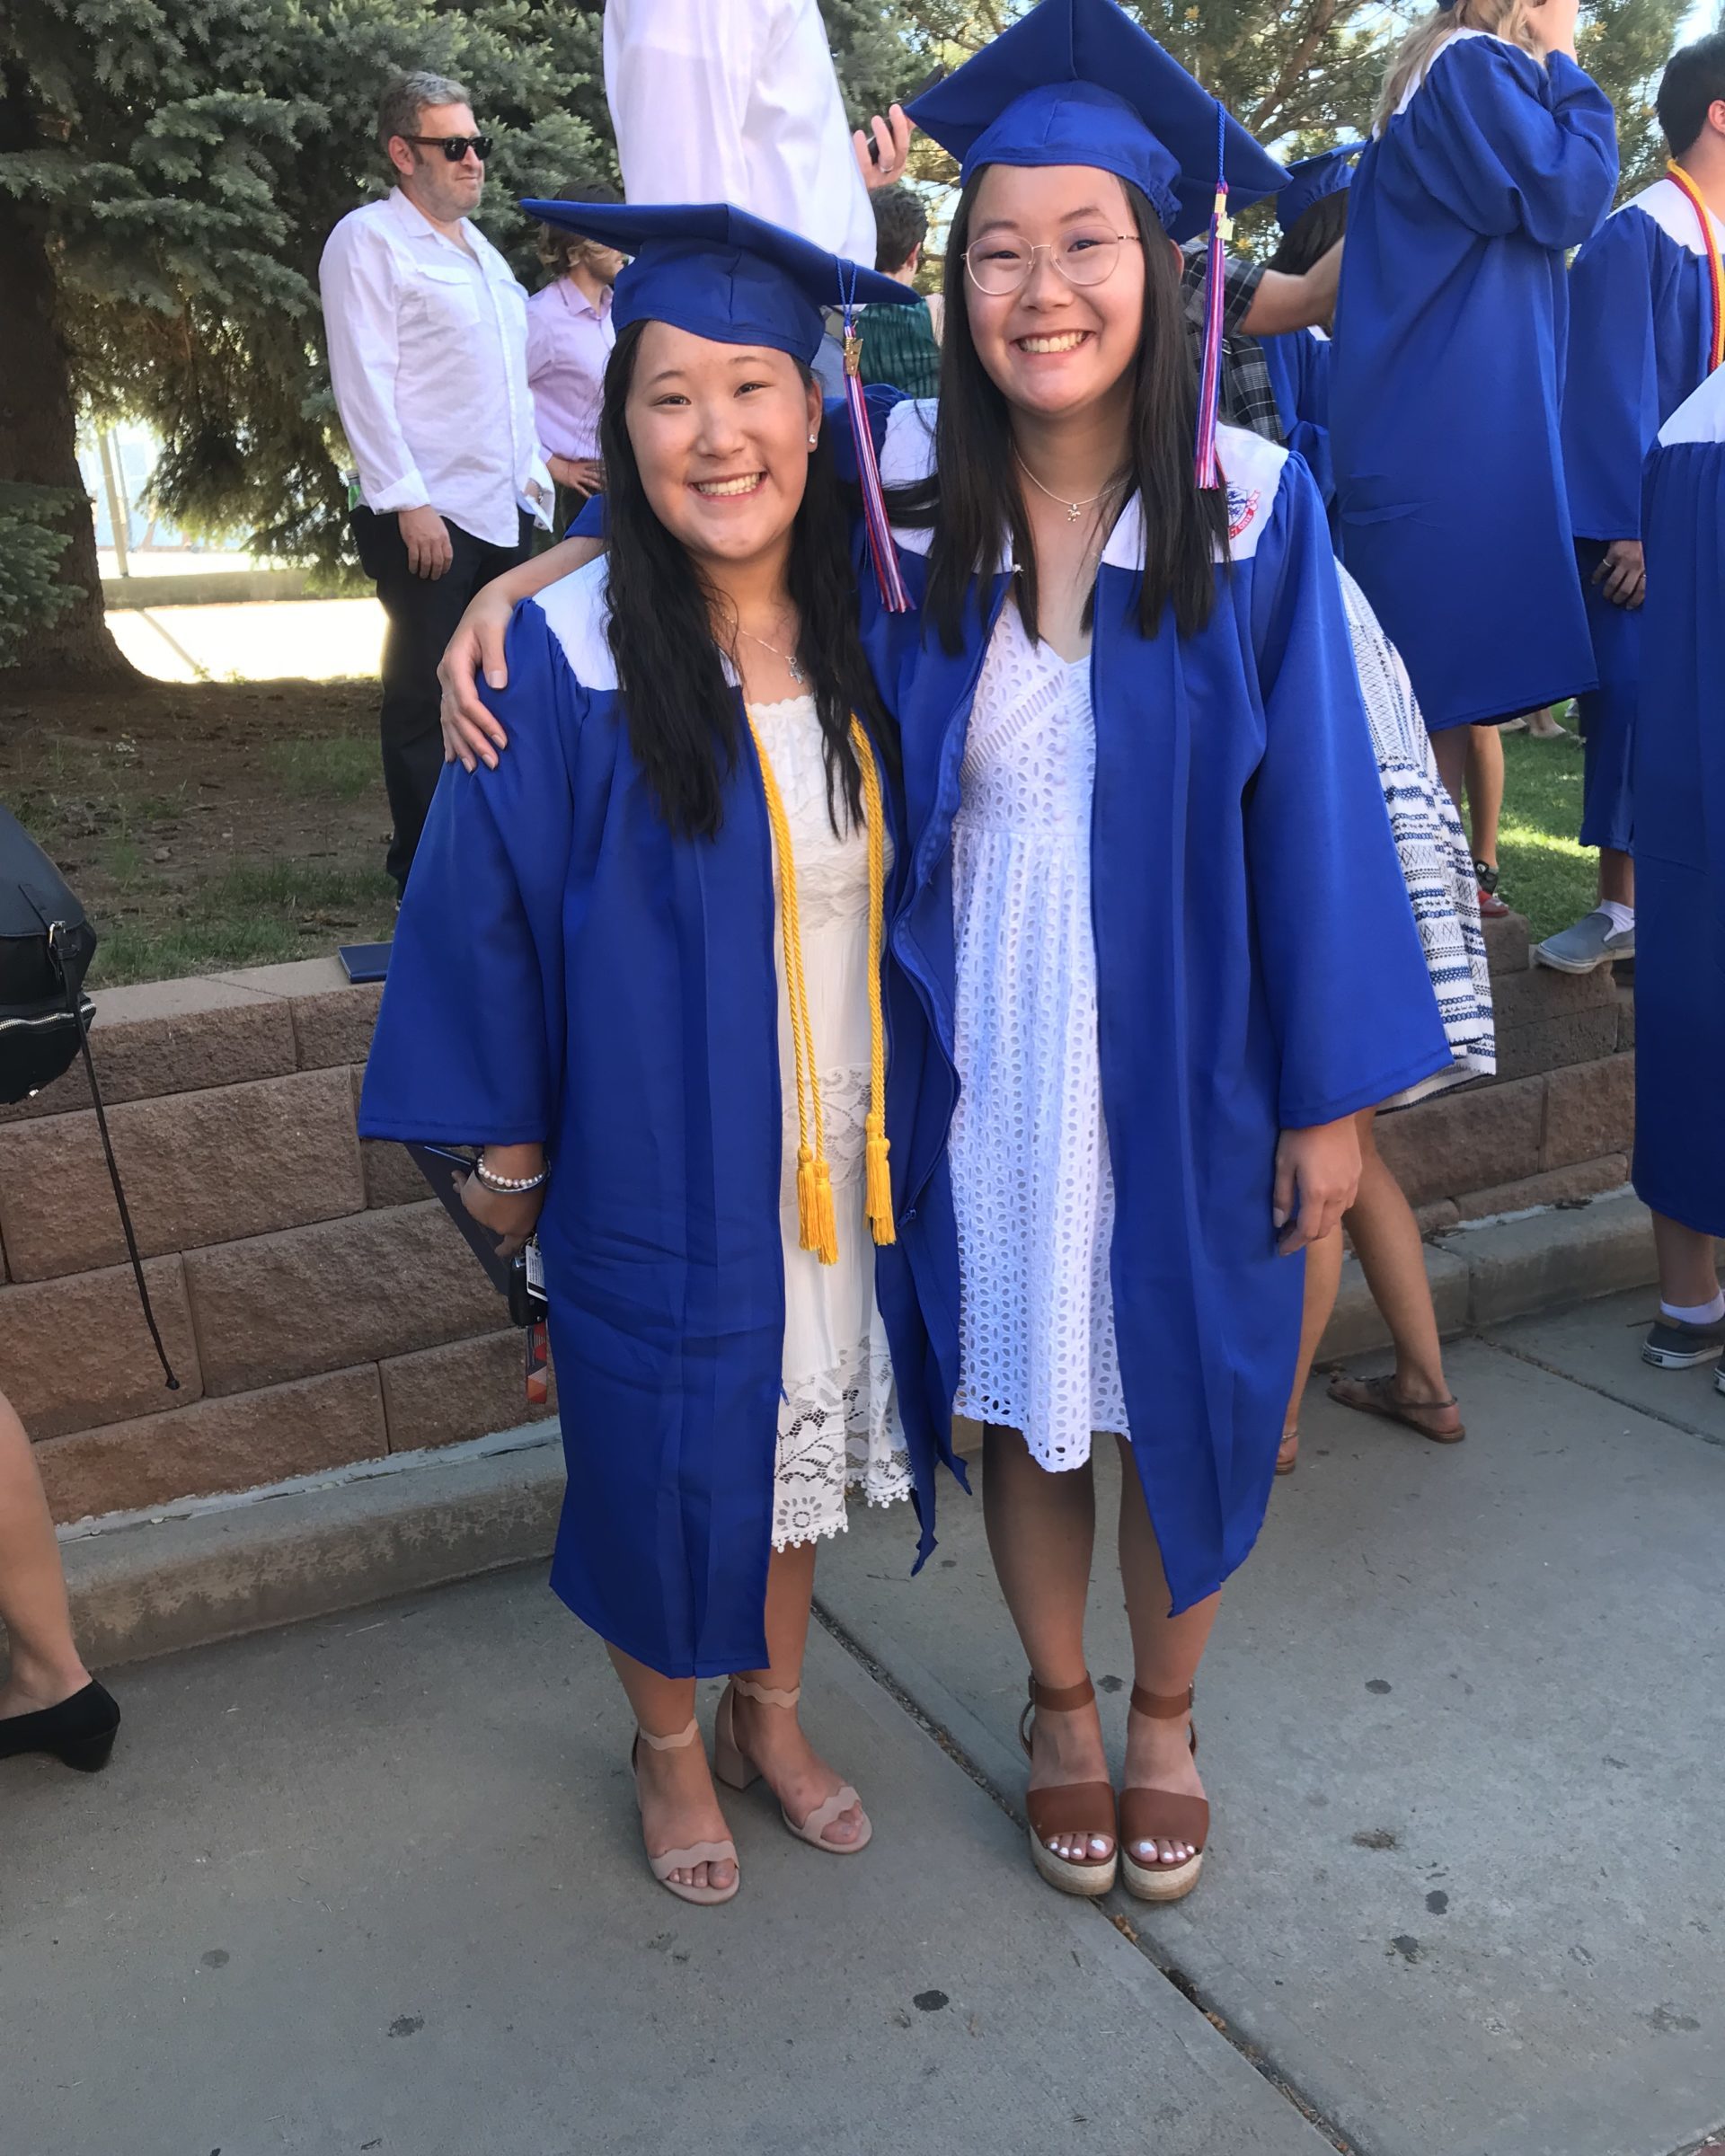 two sisters with their arms around each other wearing dresses and blue graduation cap and gowns